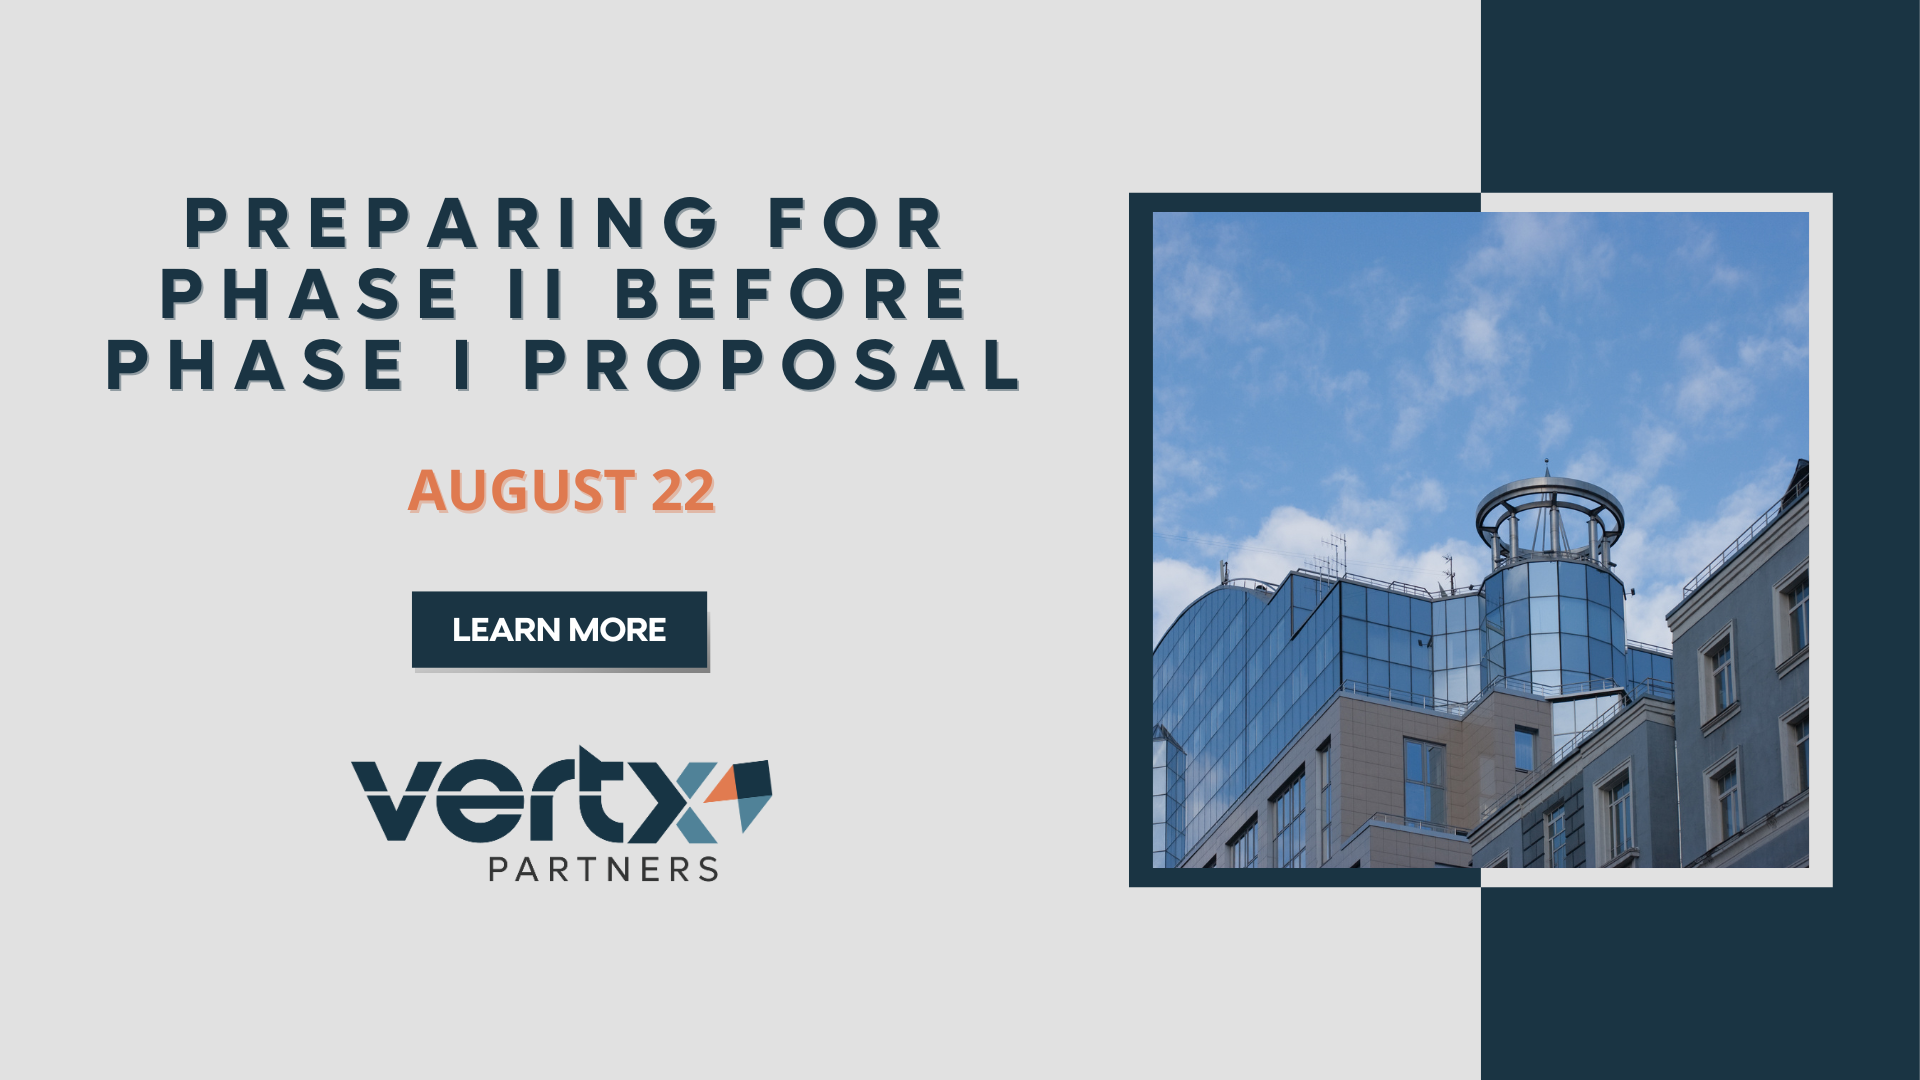 This graphic has the title "Preparing for Phase II Before Phase I Proposal" with the date August 22 underneath it and a photo to the right of a glass building with a blue sky in the background